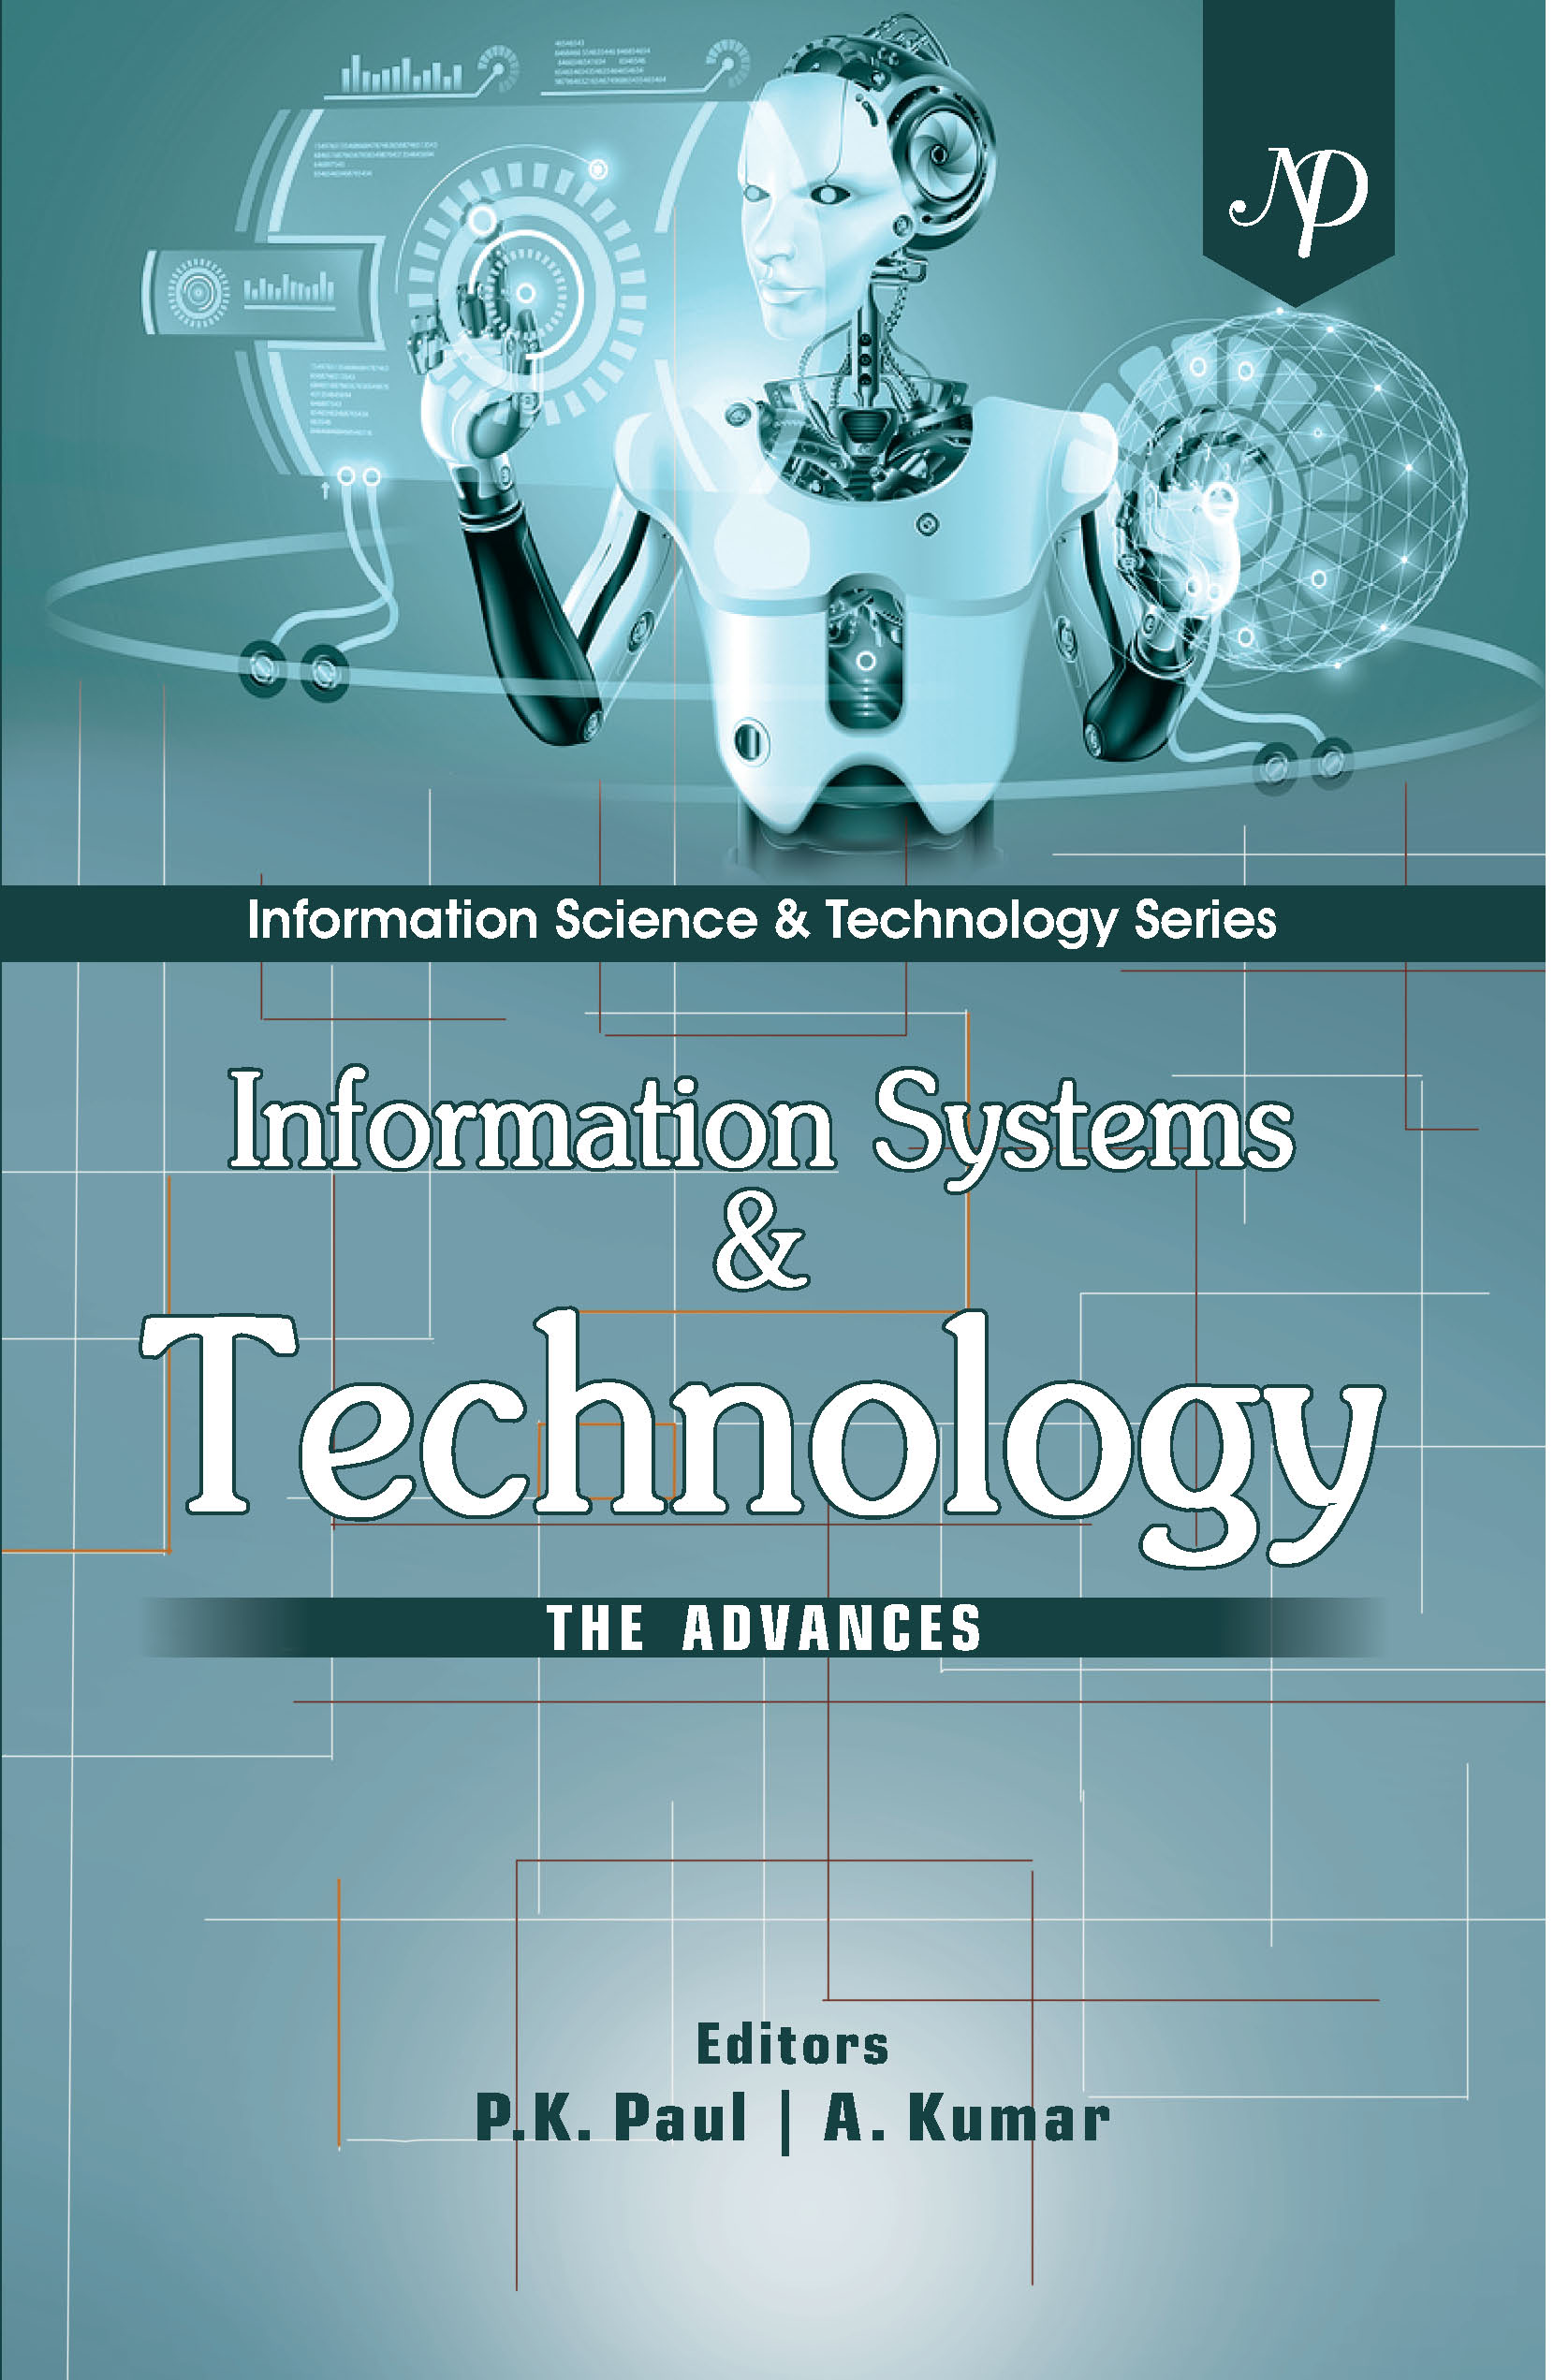 Information Systems & Technology-The Advances by PK Paul.jpg